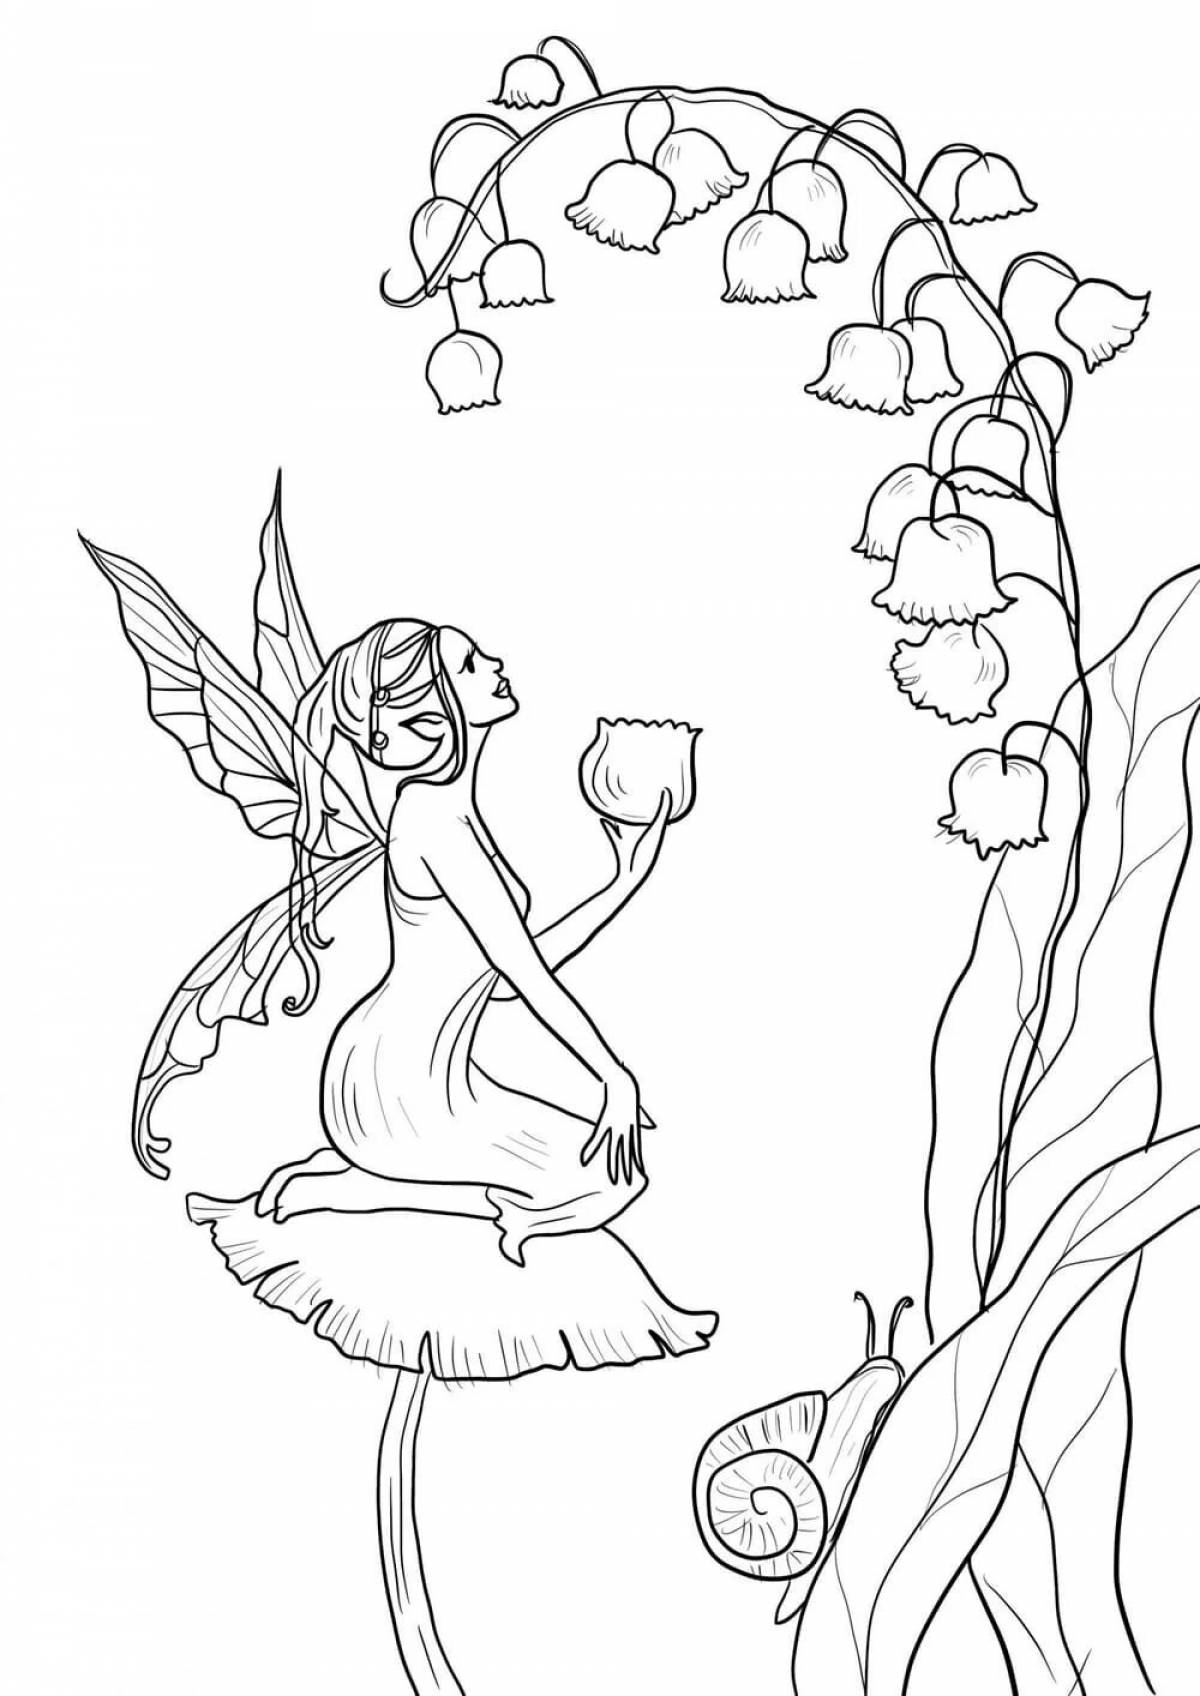 Forest fairy #2